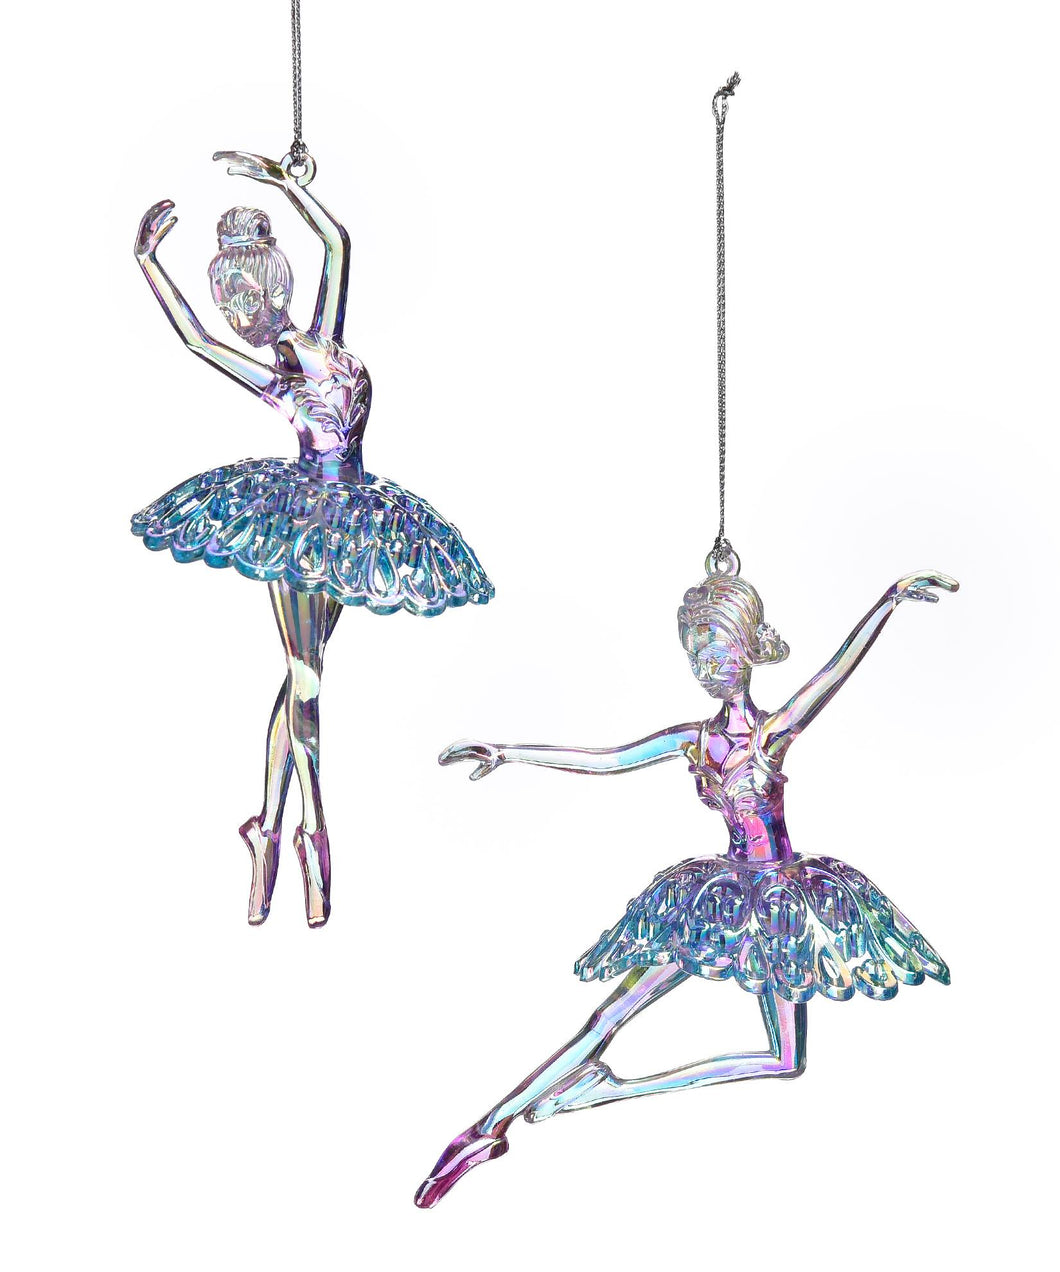 Ballerina Releve Ornament- On her Toes